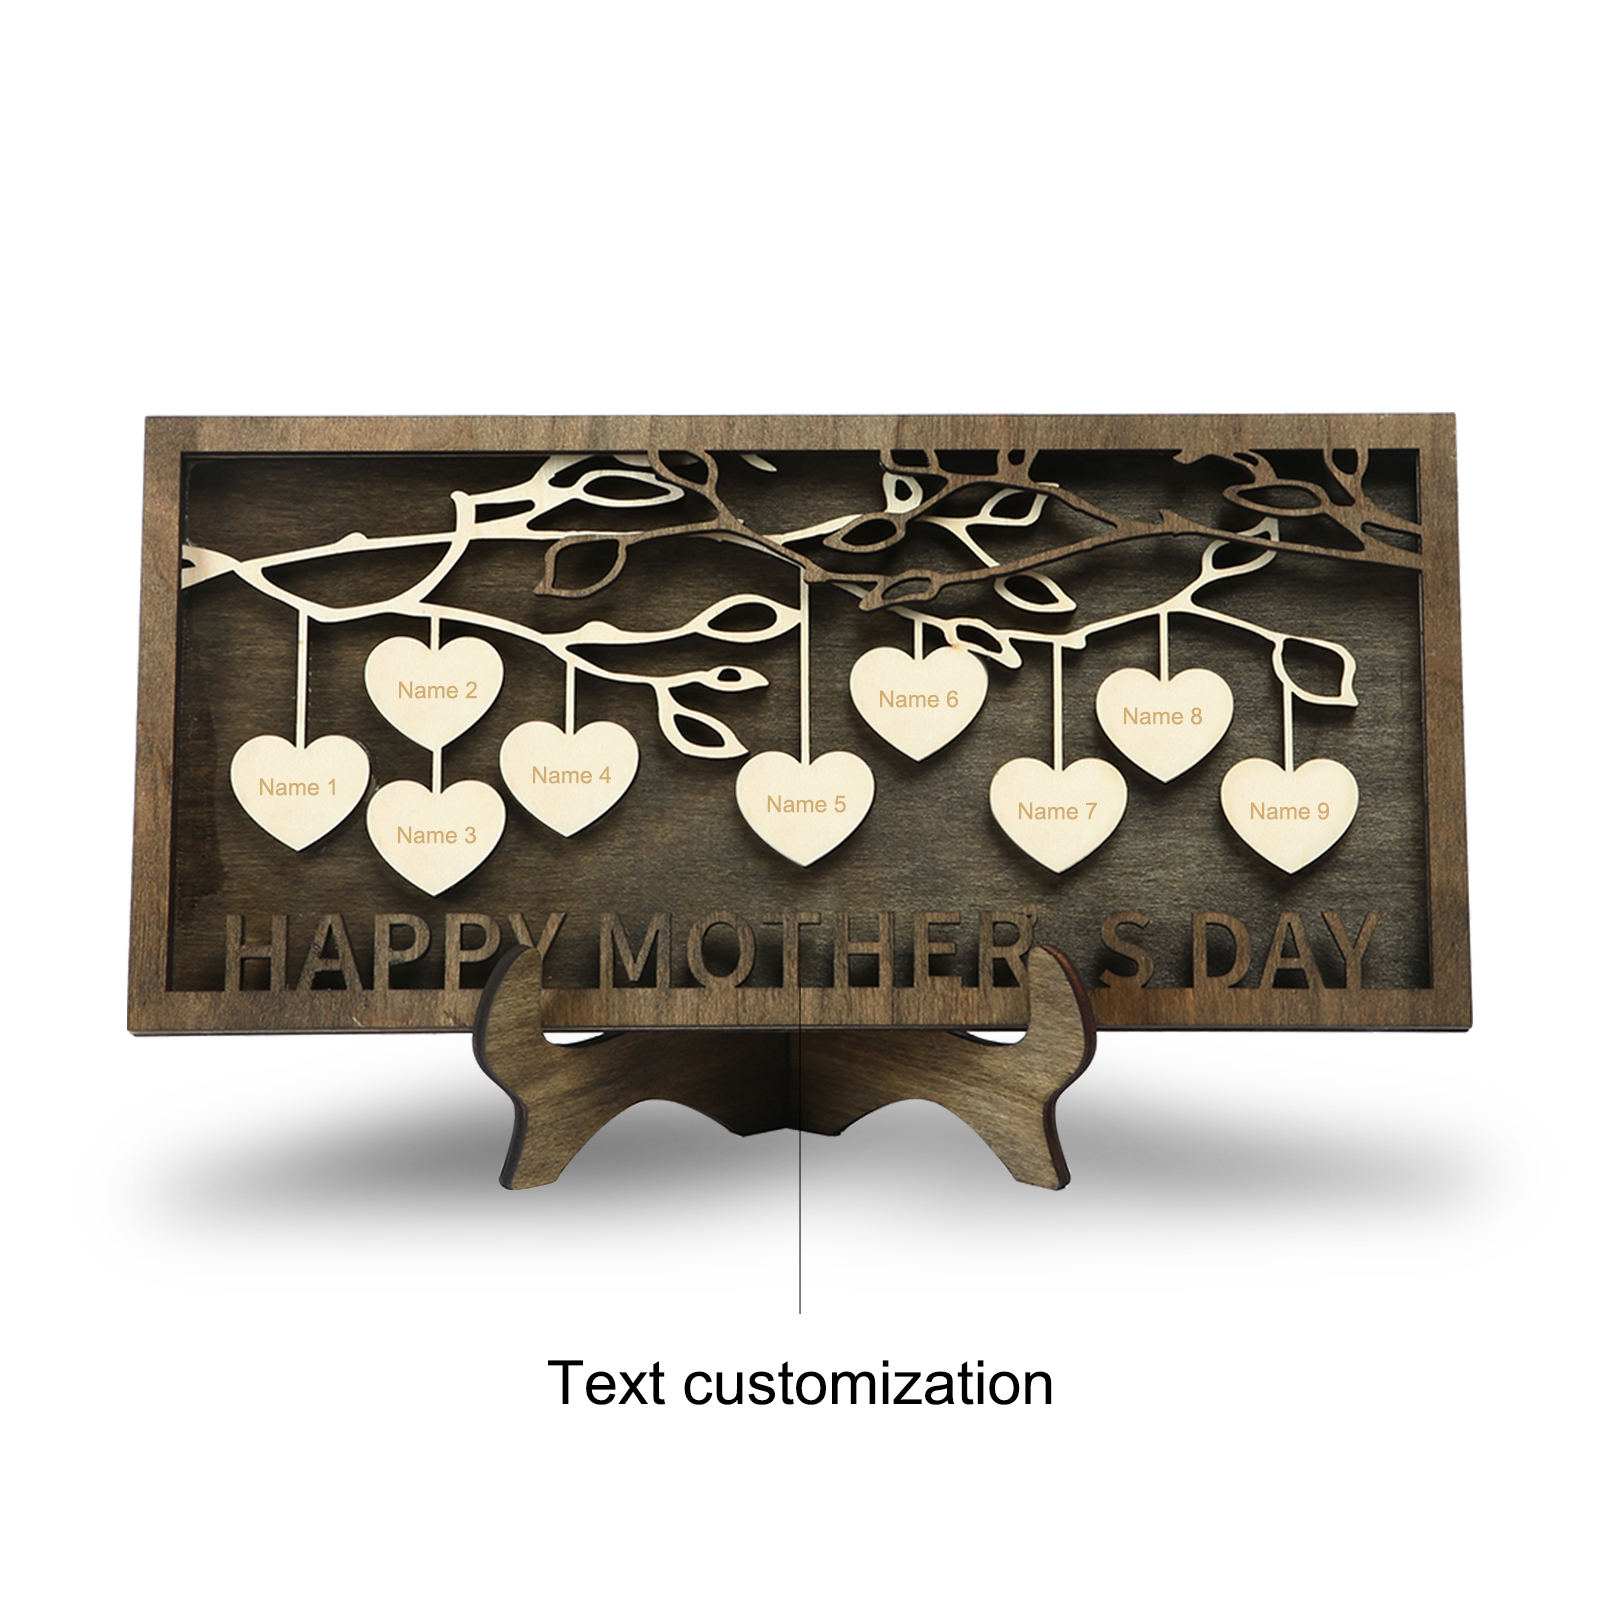 9 Names Personalized Family Tree Frame Wood Frame 9 Family Members Custom Text